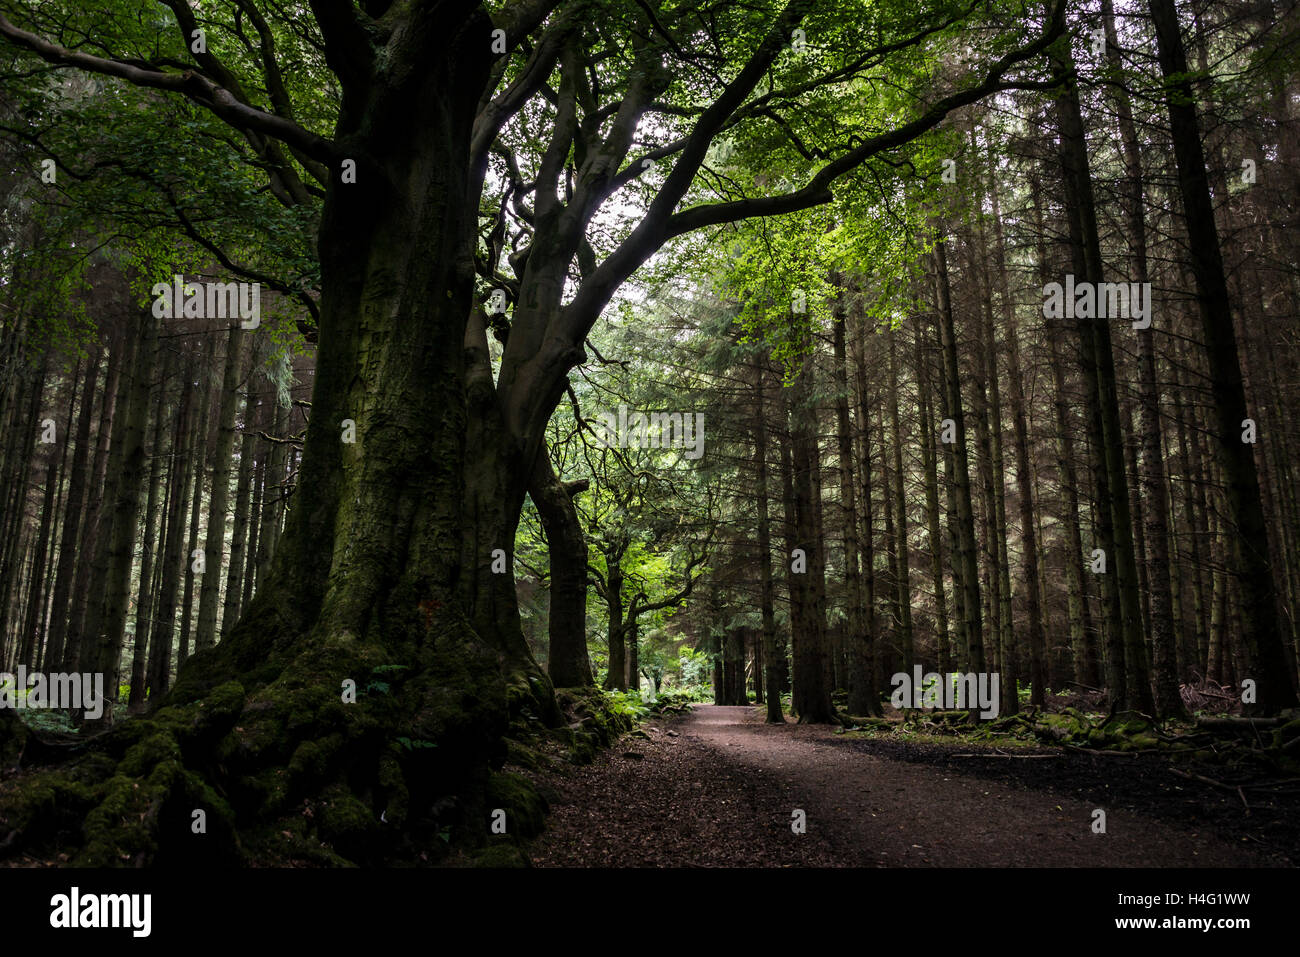 A tree looming over a path through the woods Stock Photo